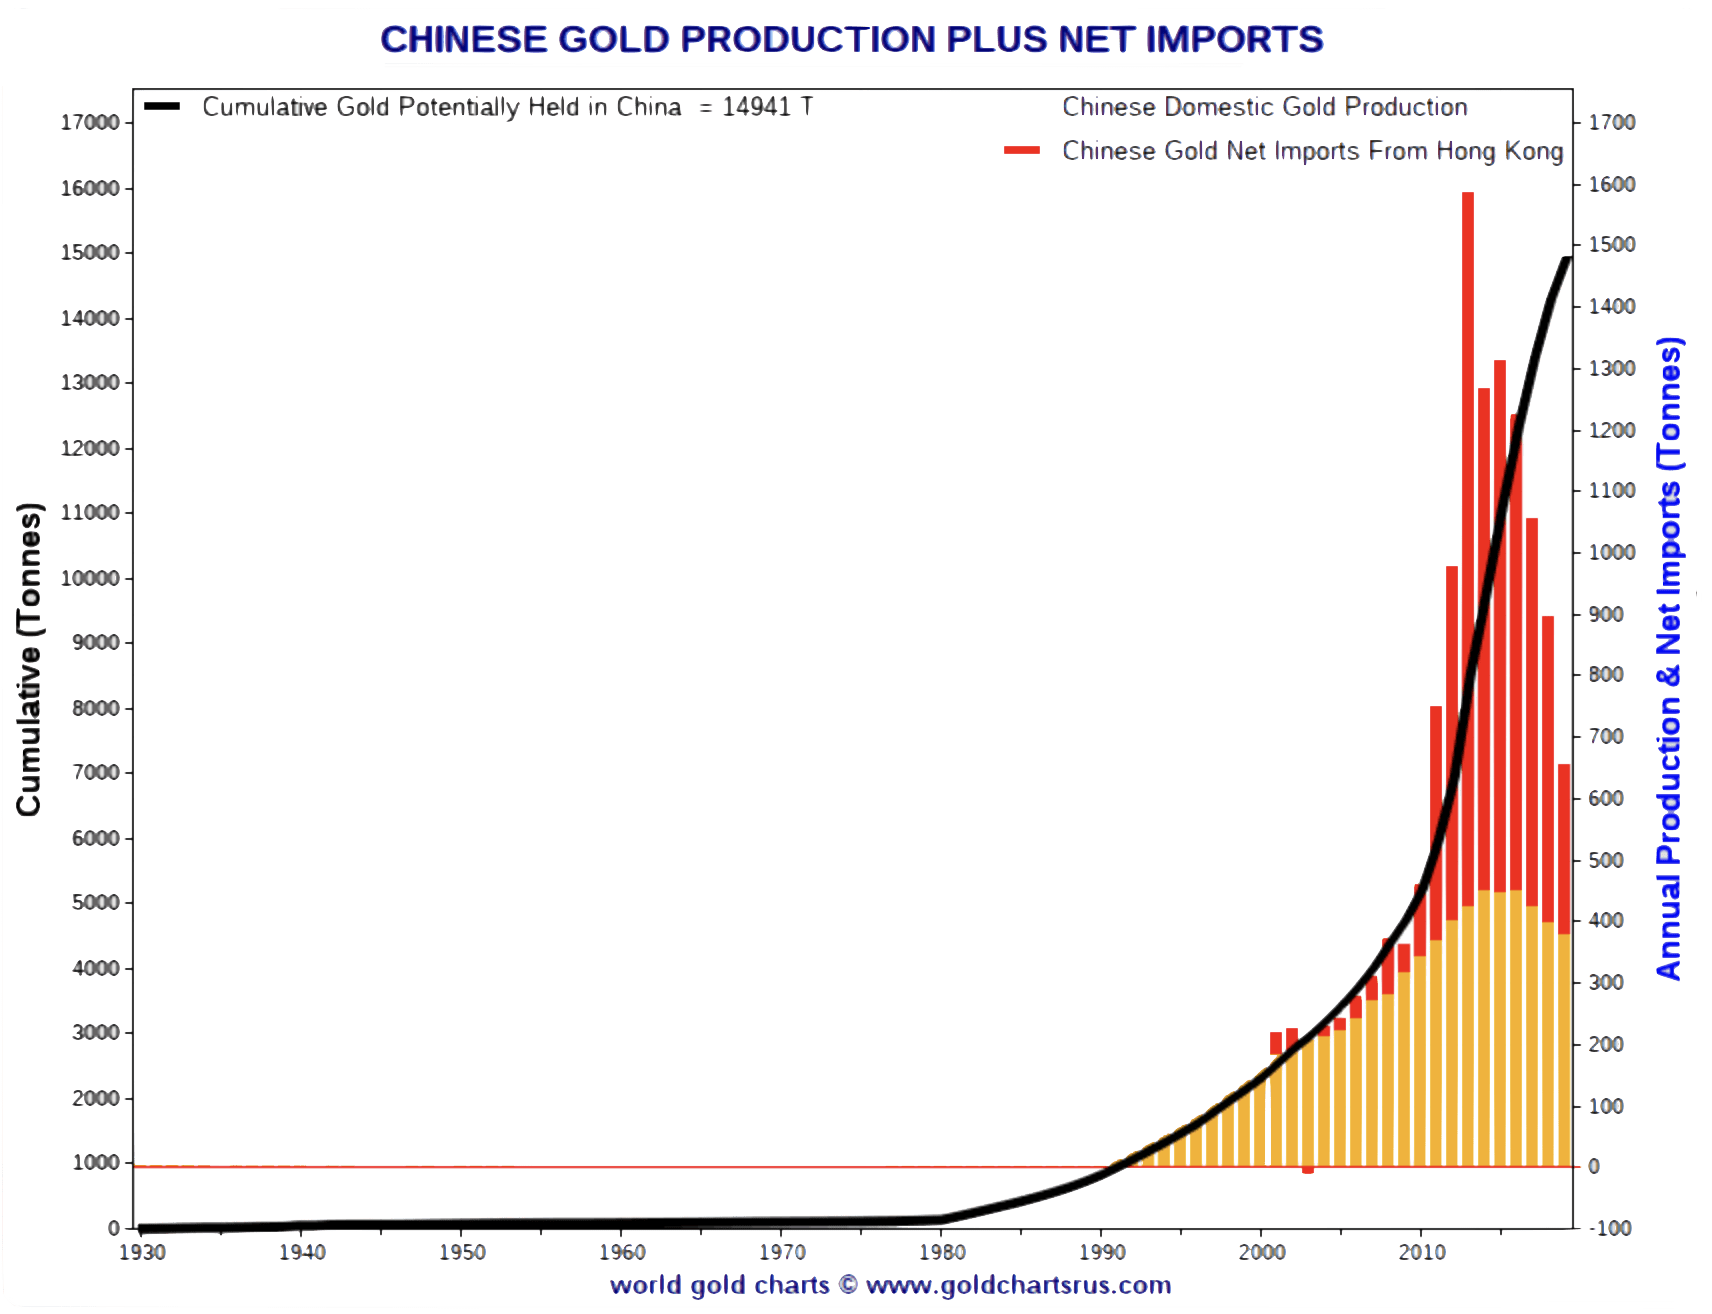 overlay line and bar chart showing China's accumulation of gold since 1980